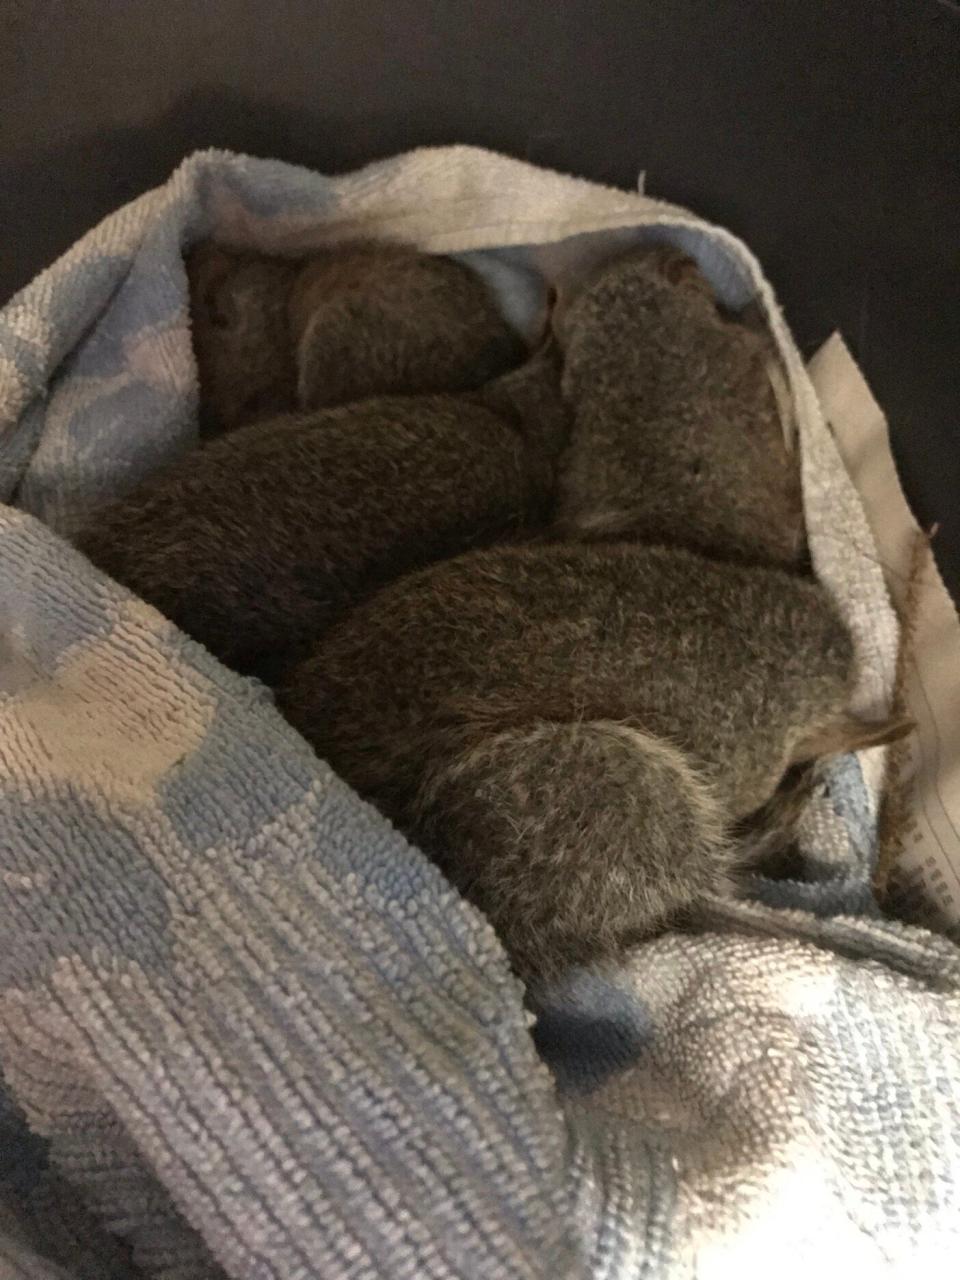 The squirrels sleeping following their ordeal (RSPCA)